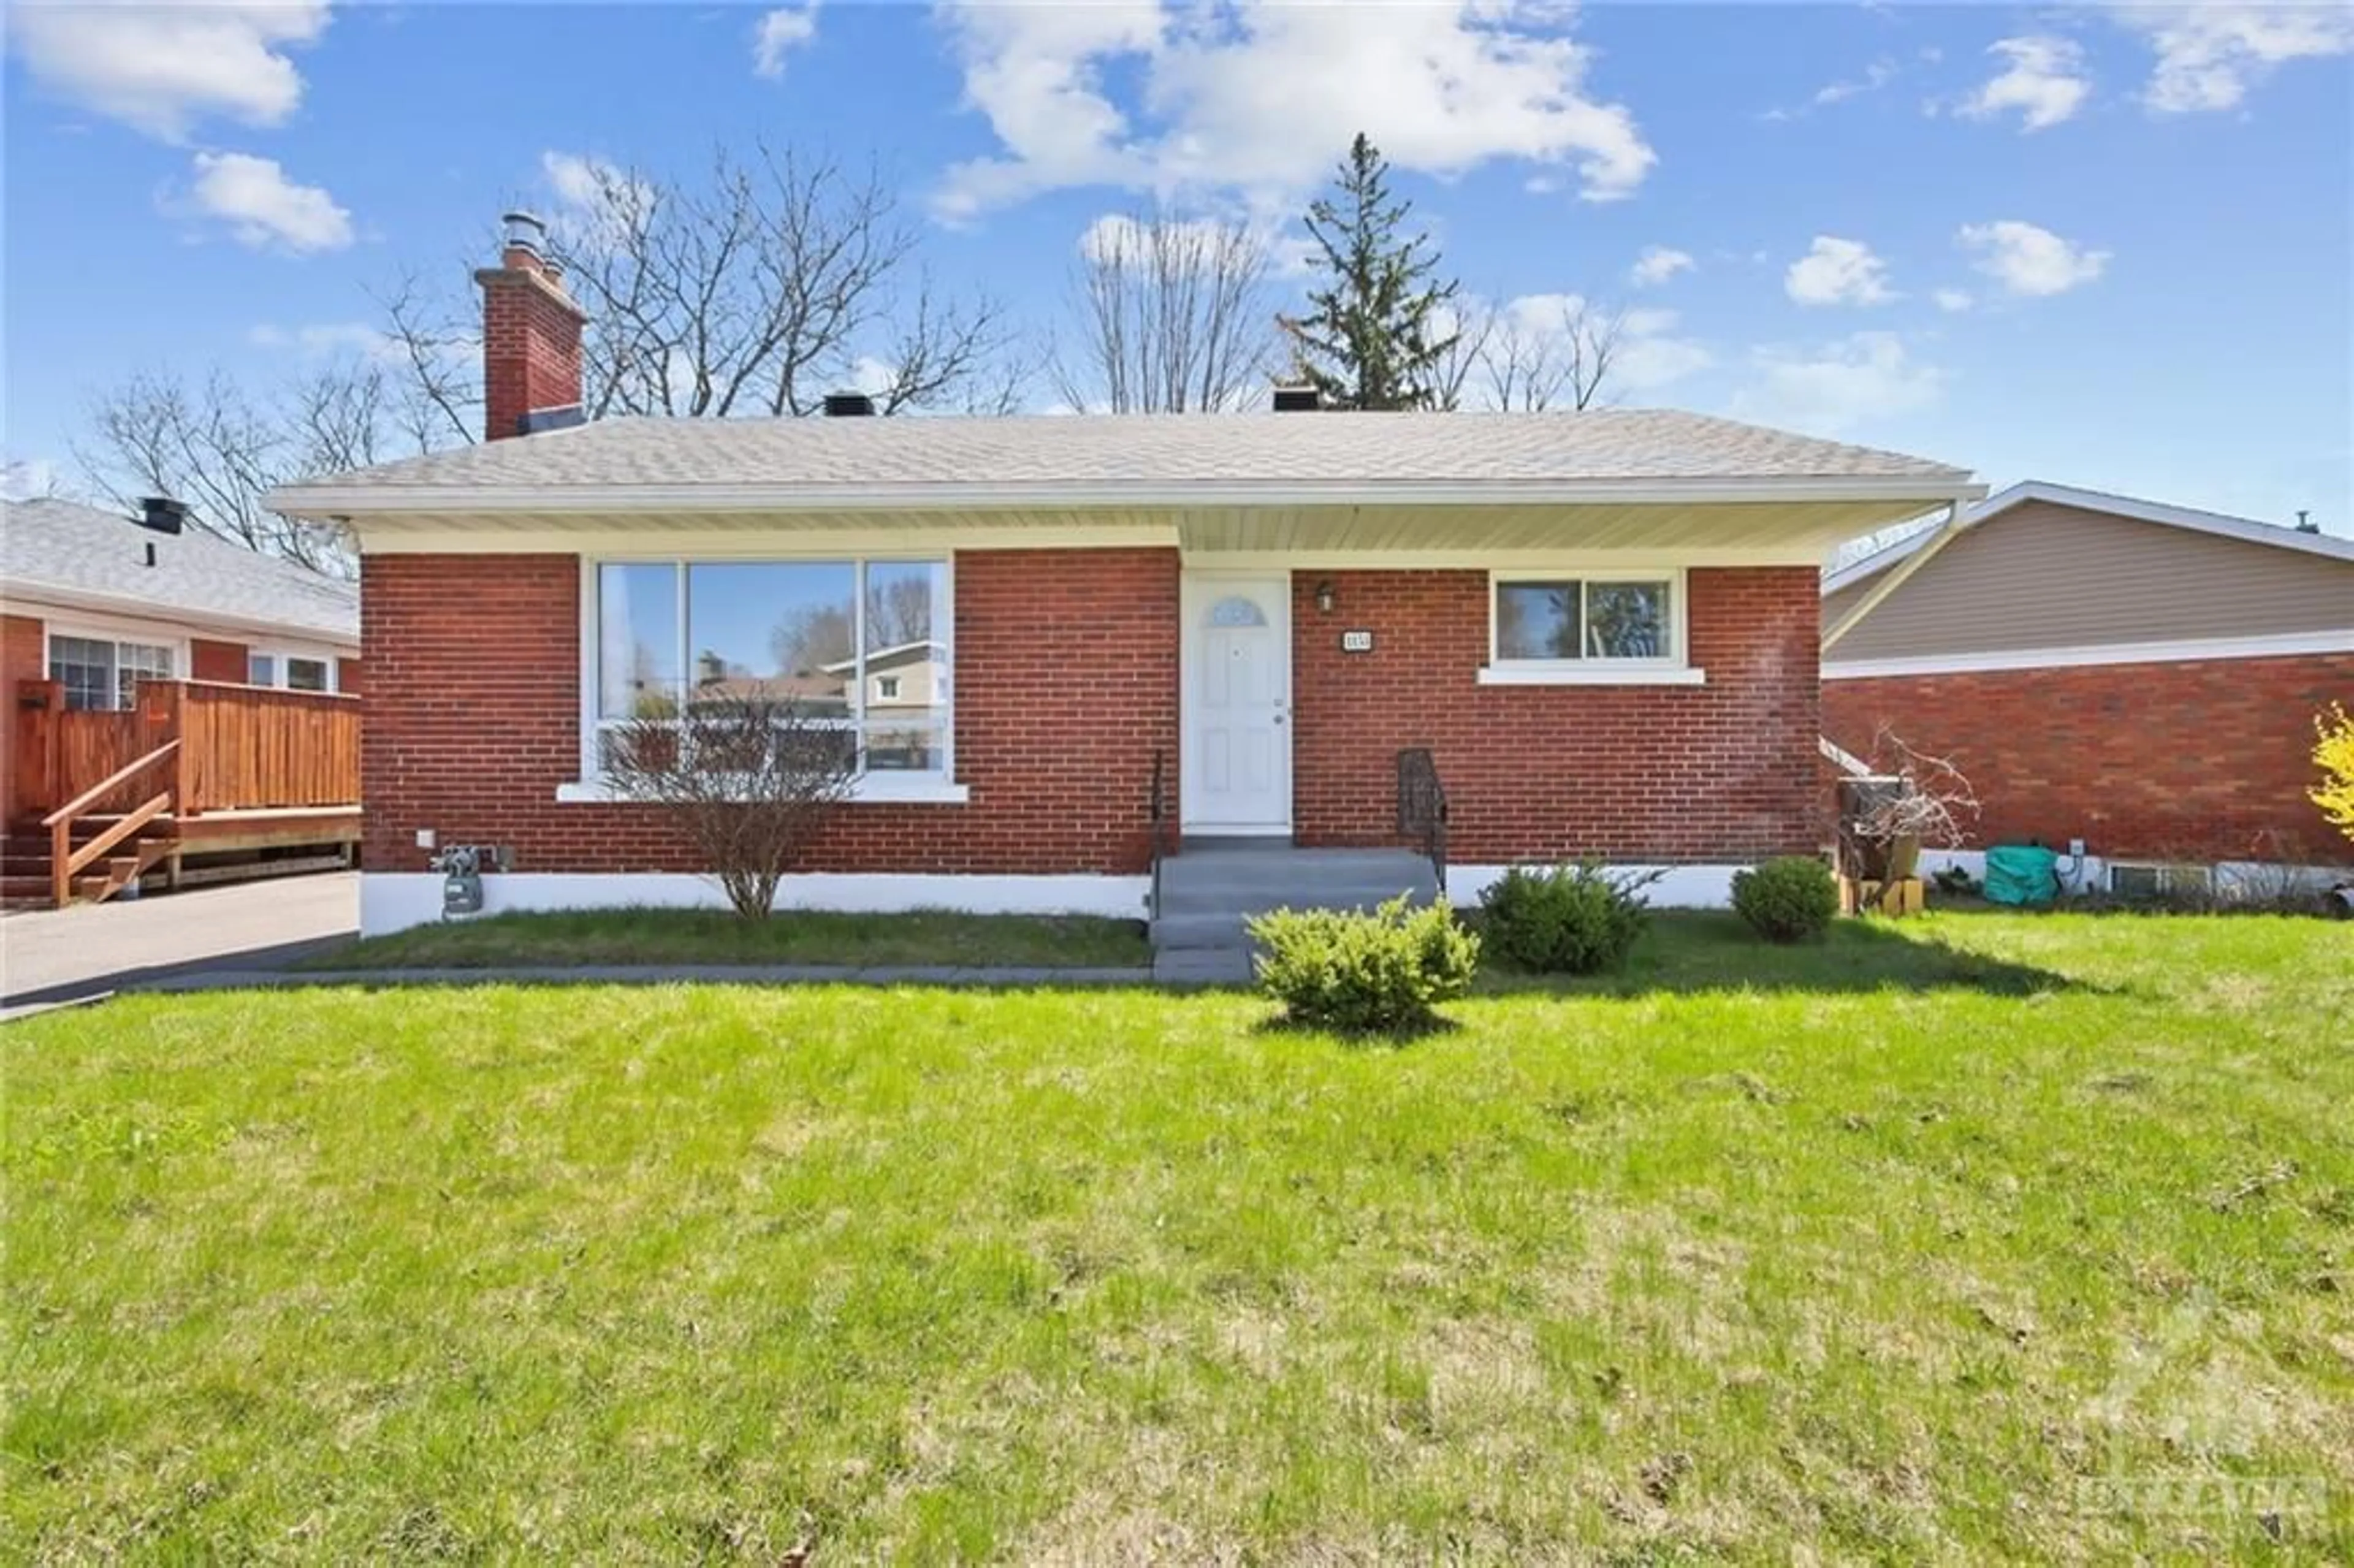 Home with brick exterior material for 1153 ALBANY Dr, Ottawa Ontario K2C 2L1